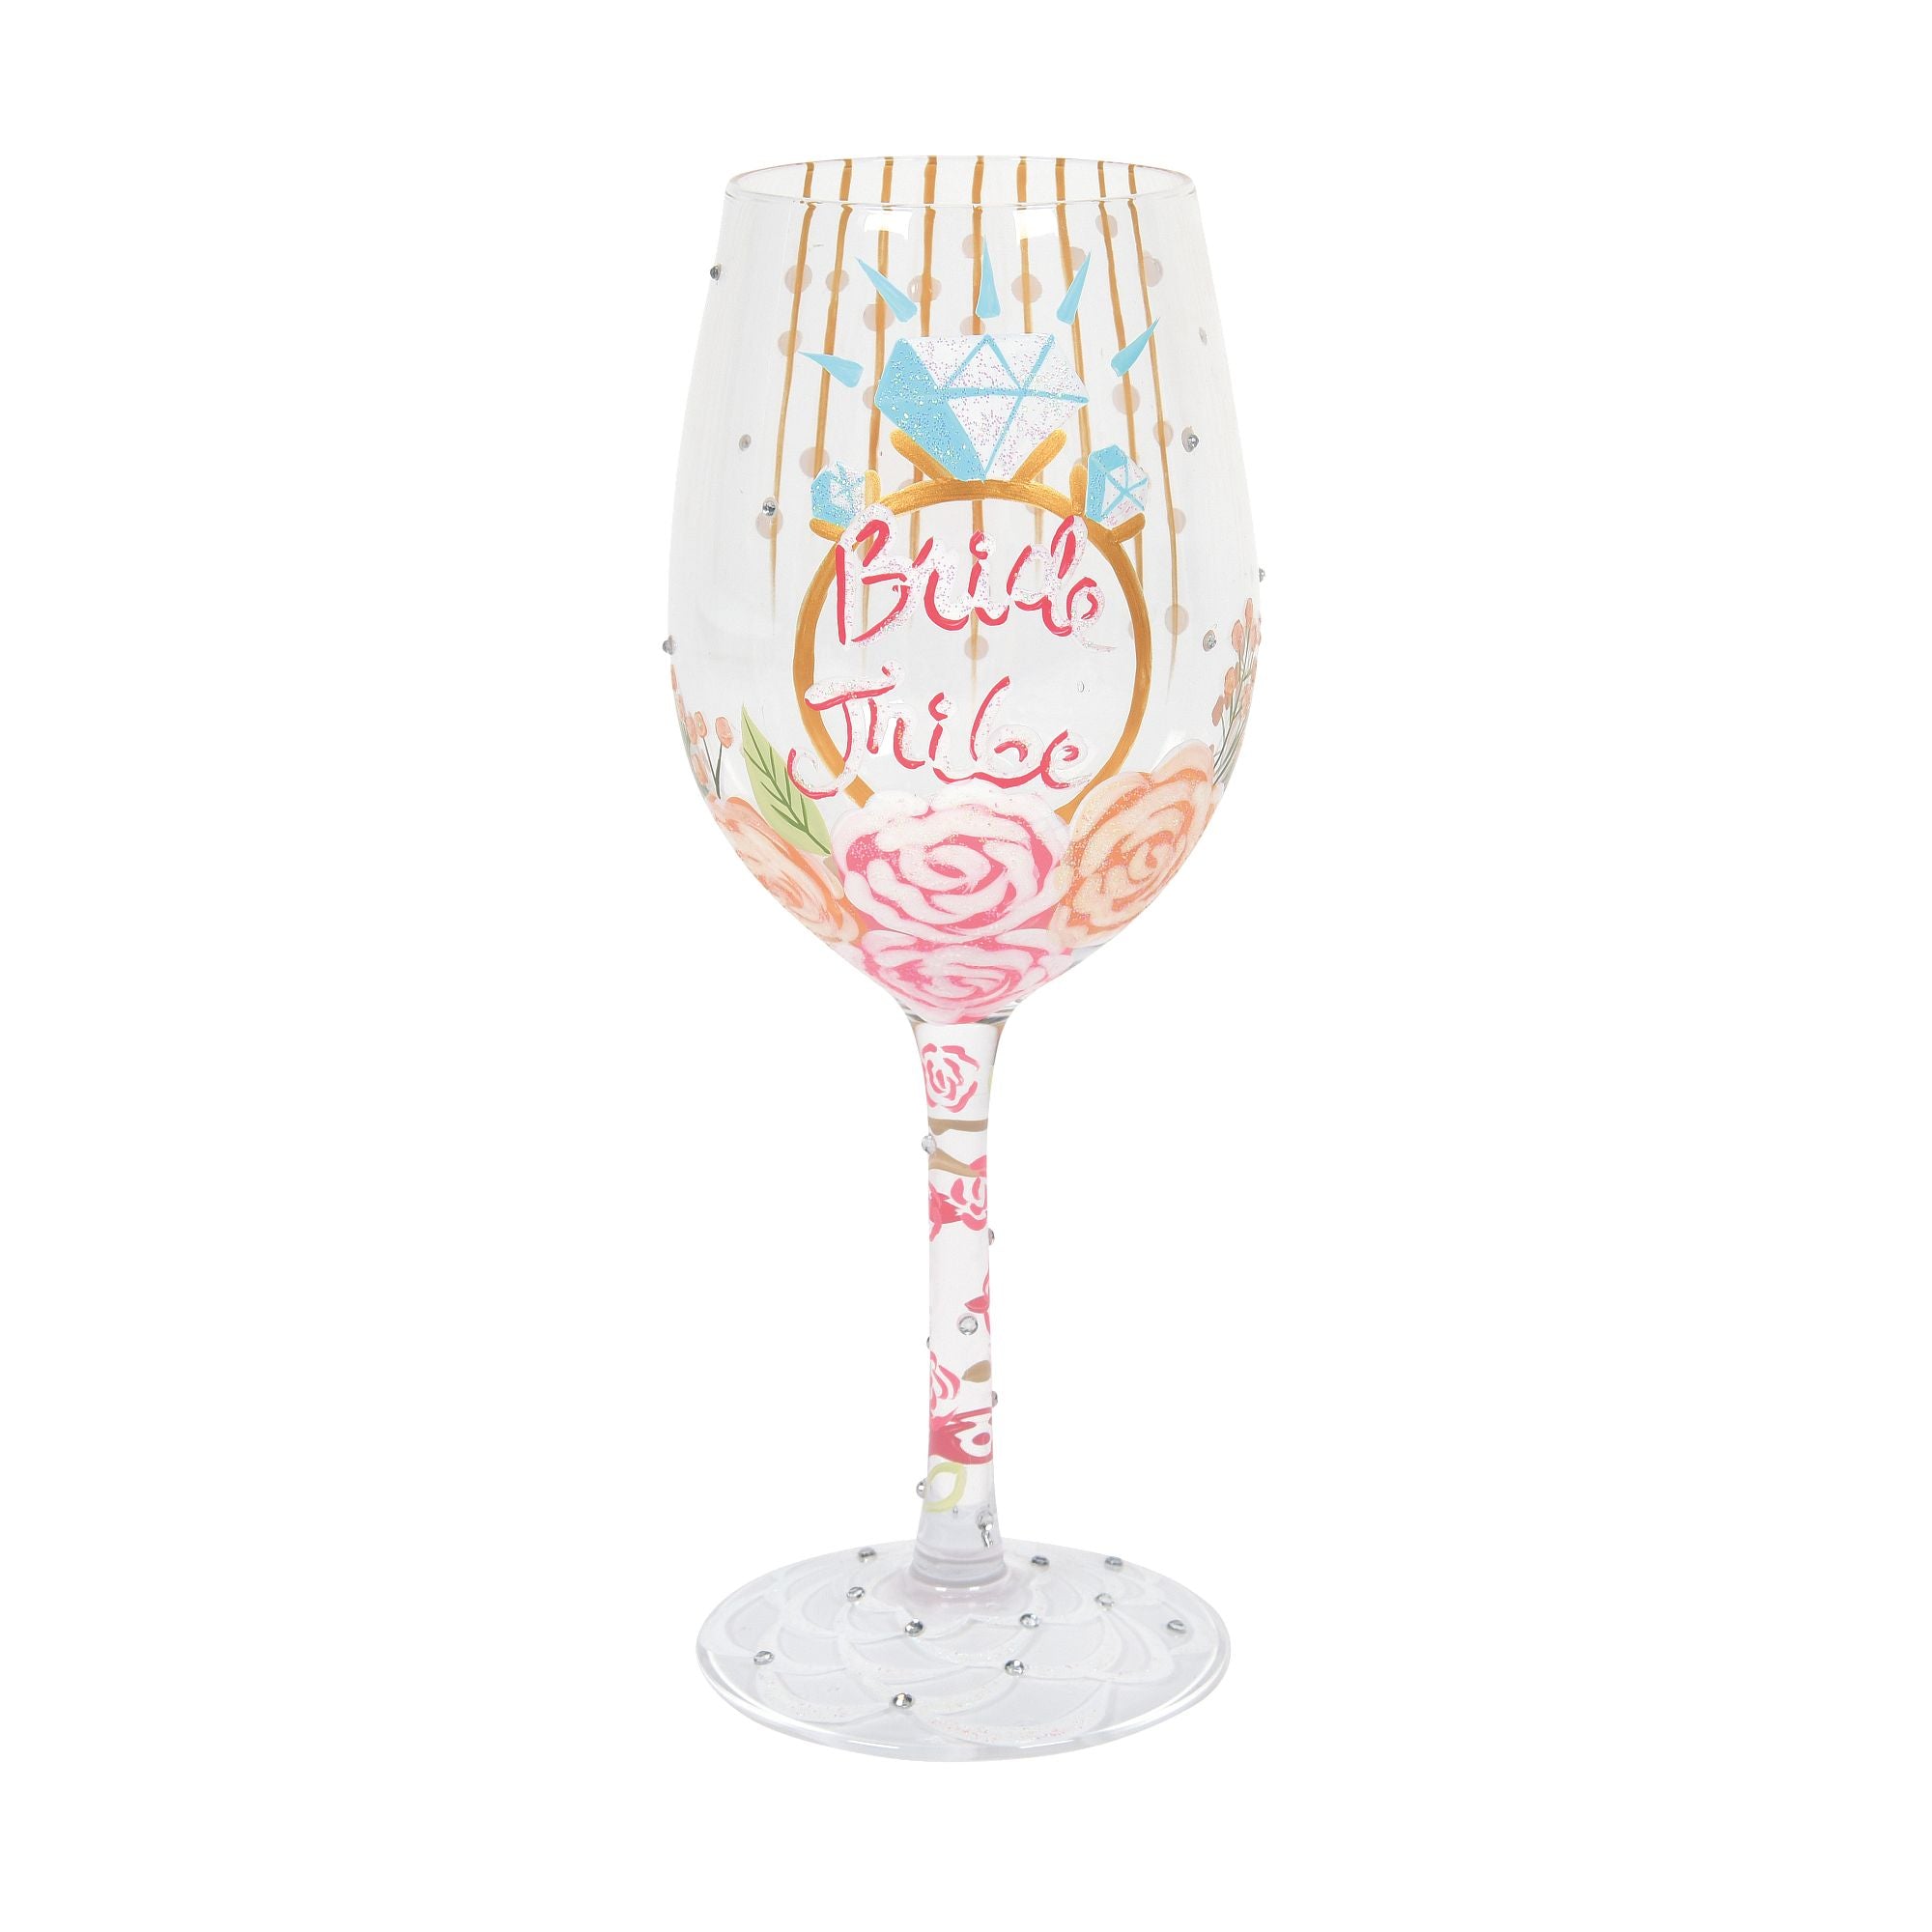 Lolita Bride and Groom Artisan Made Hand Painted Wine Glass Set - Designs  by Lolita